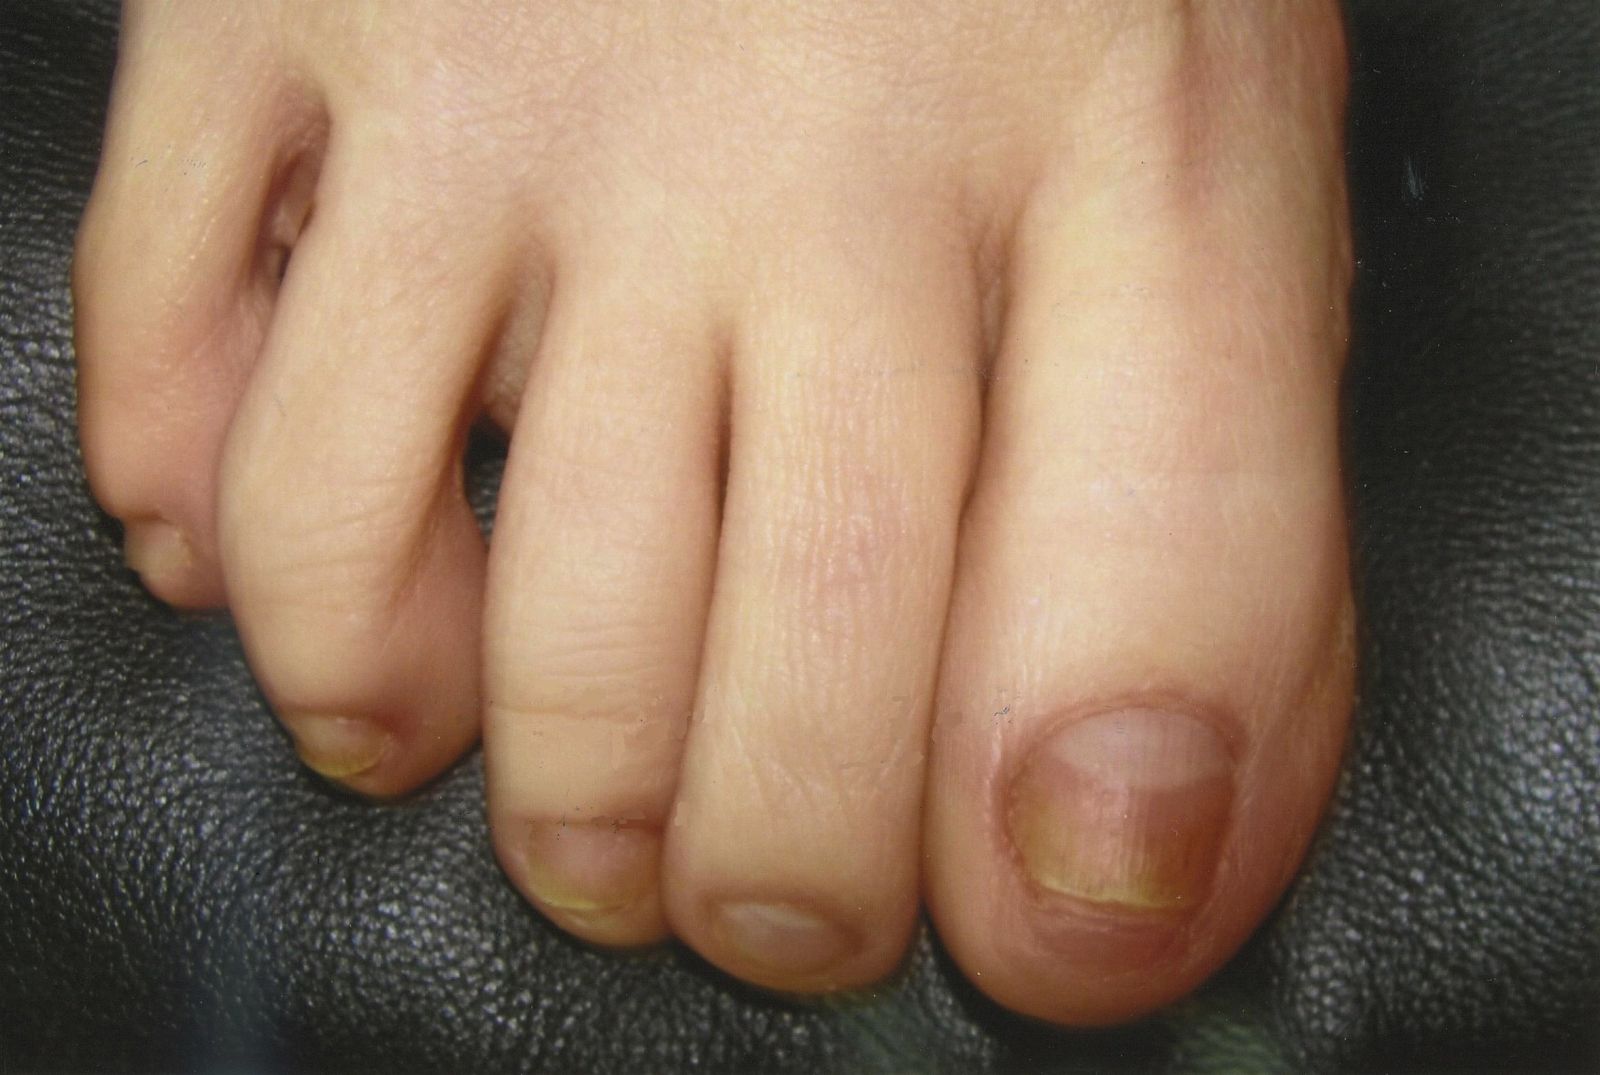 Three months after the laser treatment for toenail fungus